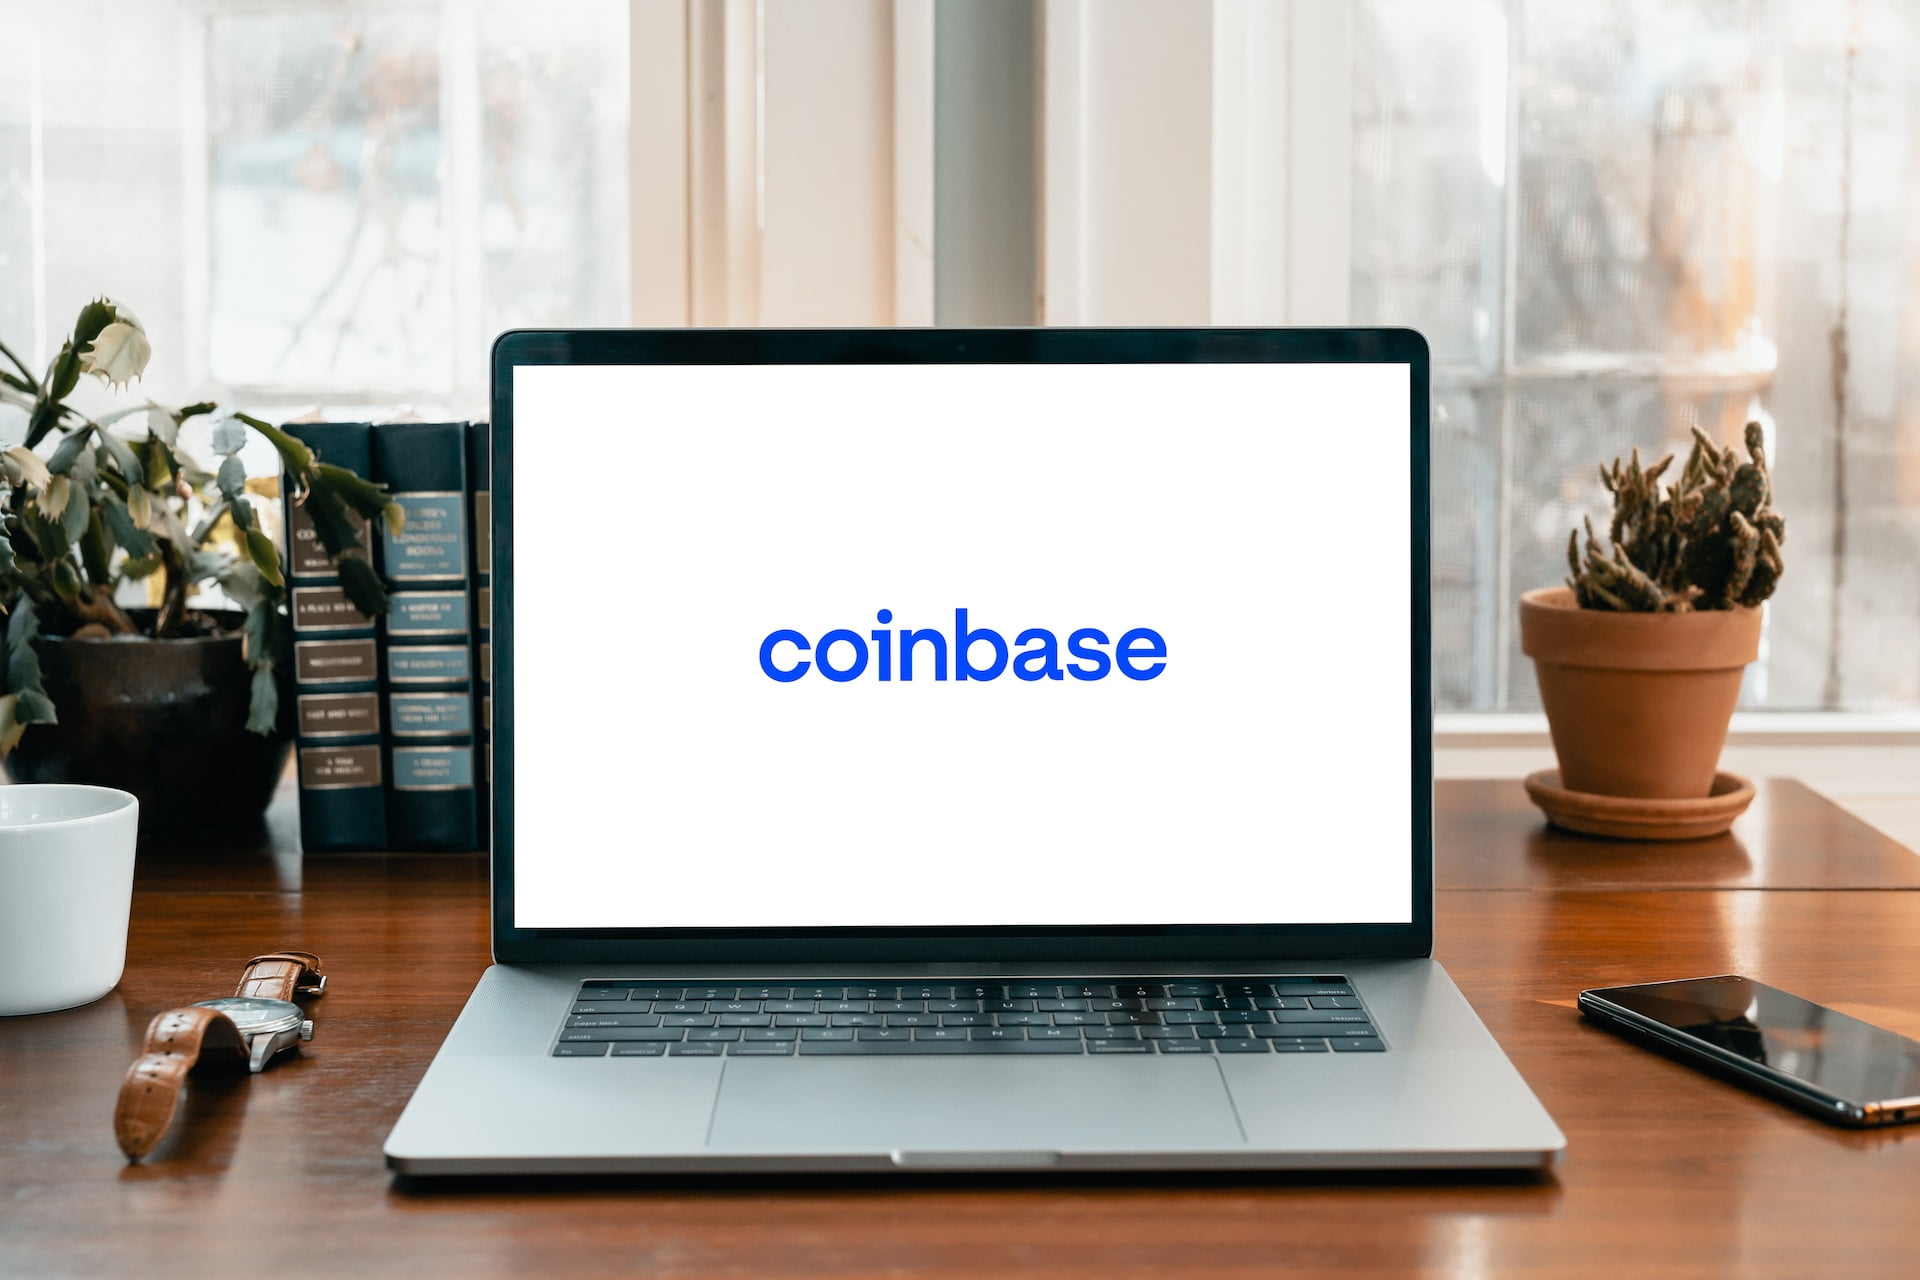 Coinbase Direct Deposit revolutionized with Blockchain-Based stablecoin settlements